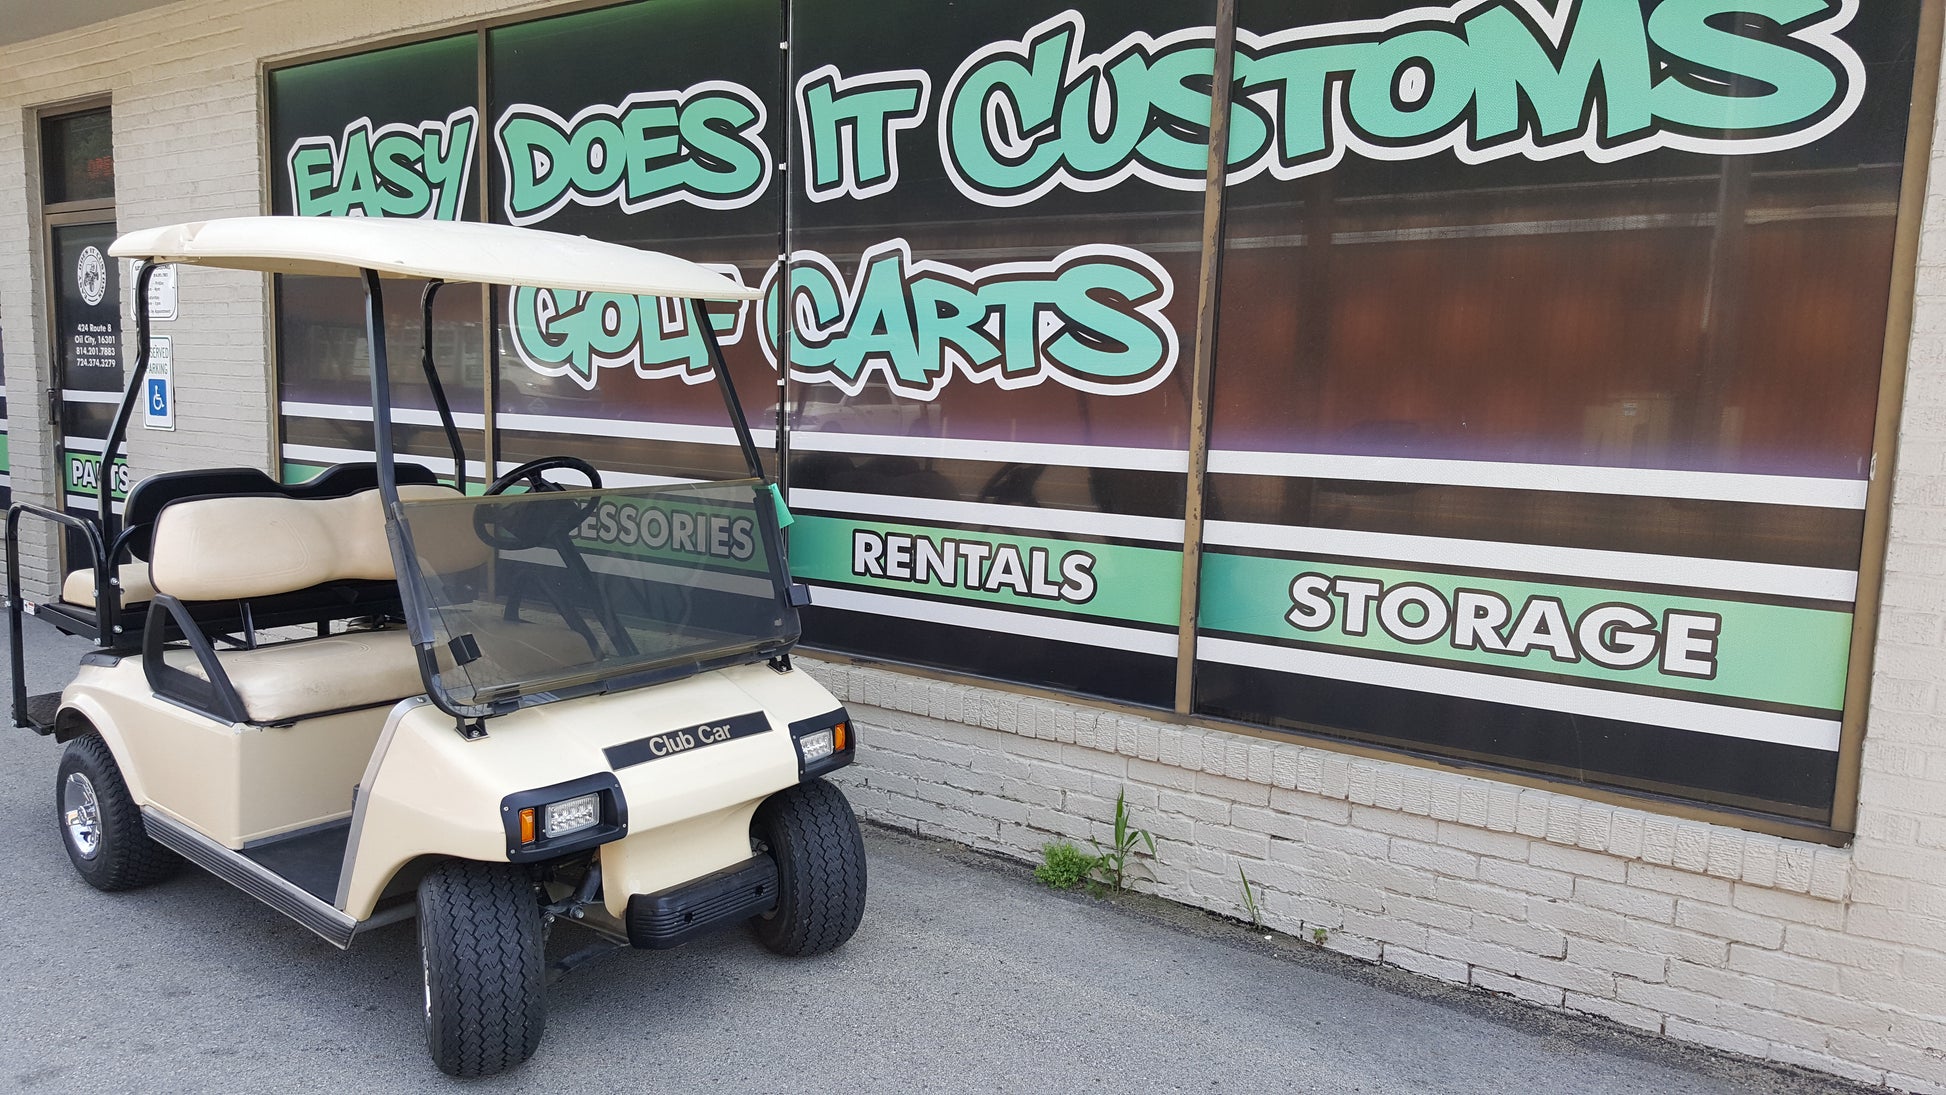 2004 Club Car DS Gas cart. Custom rims and tires, LED lights, Rear seat.  $3400, By Griswold Golf Carts